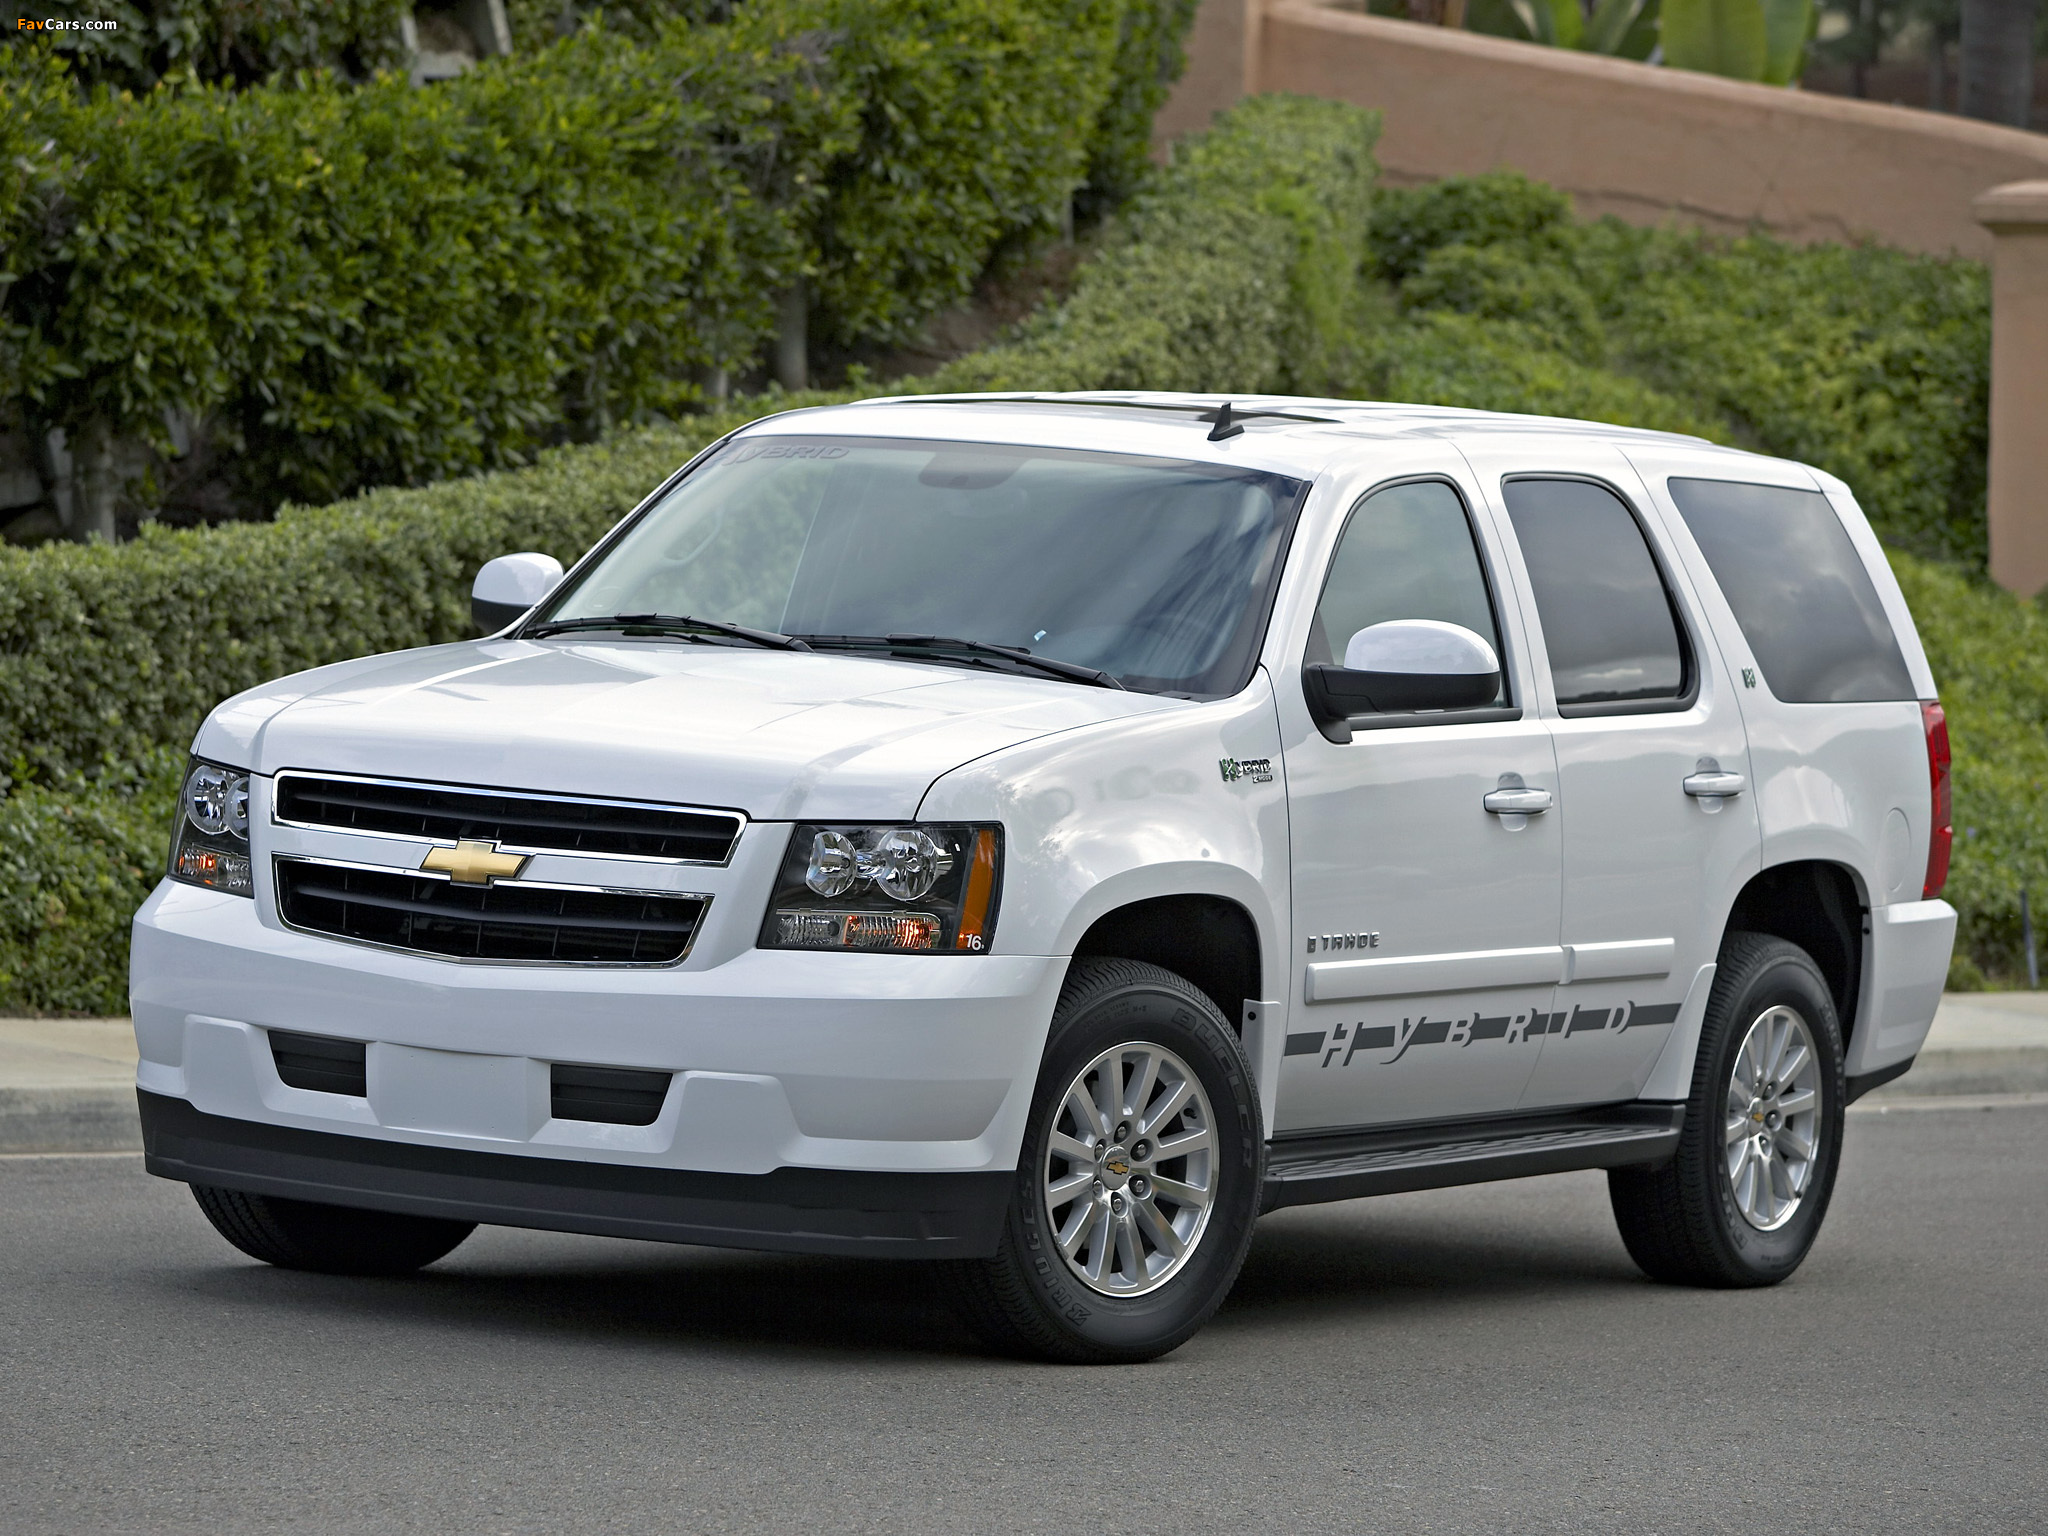 Chevrolet Tahoe Hybrid (GMT900) 2008 wallpapers (2048 x 1536)